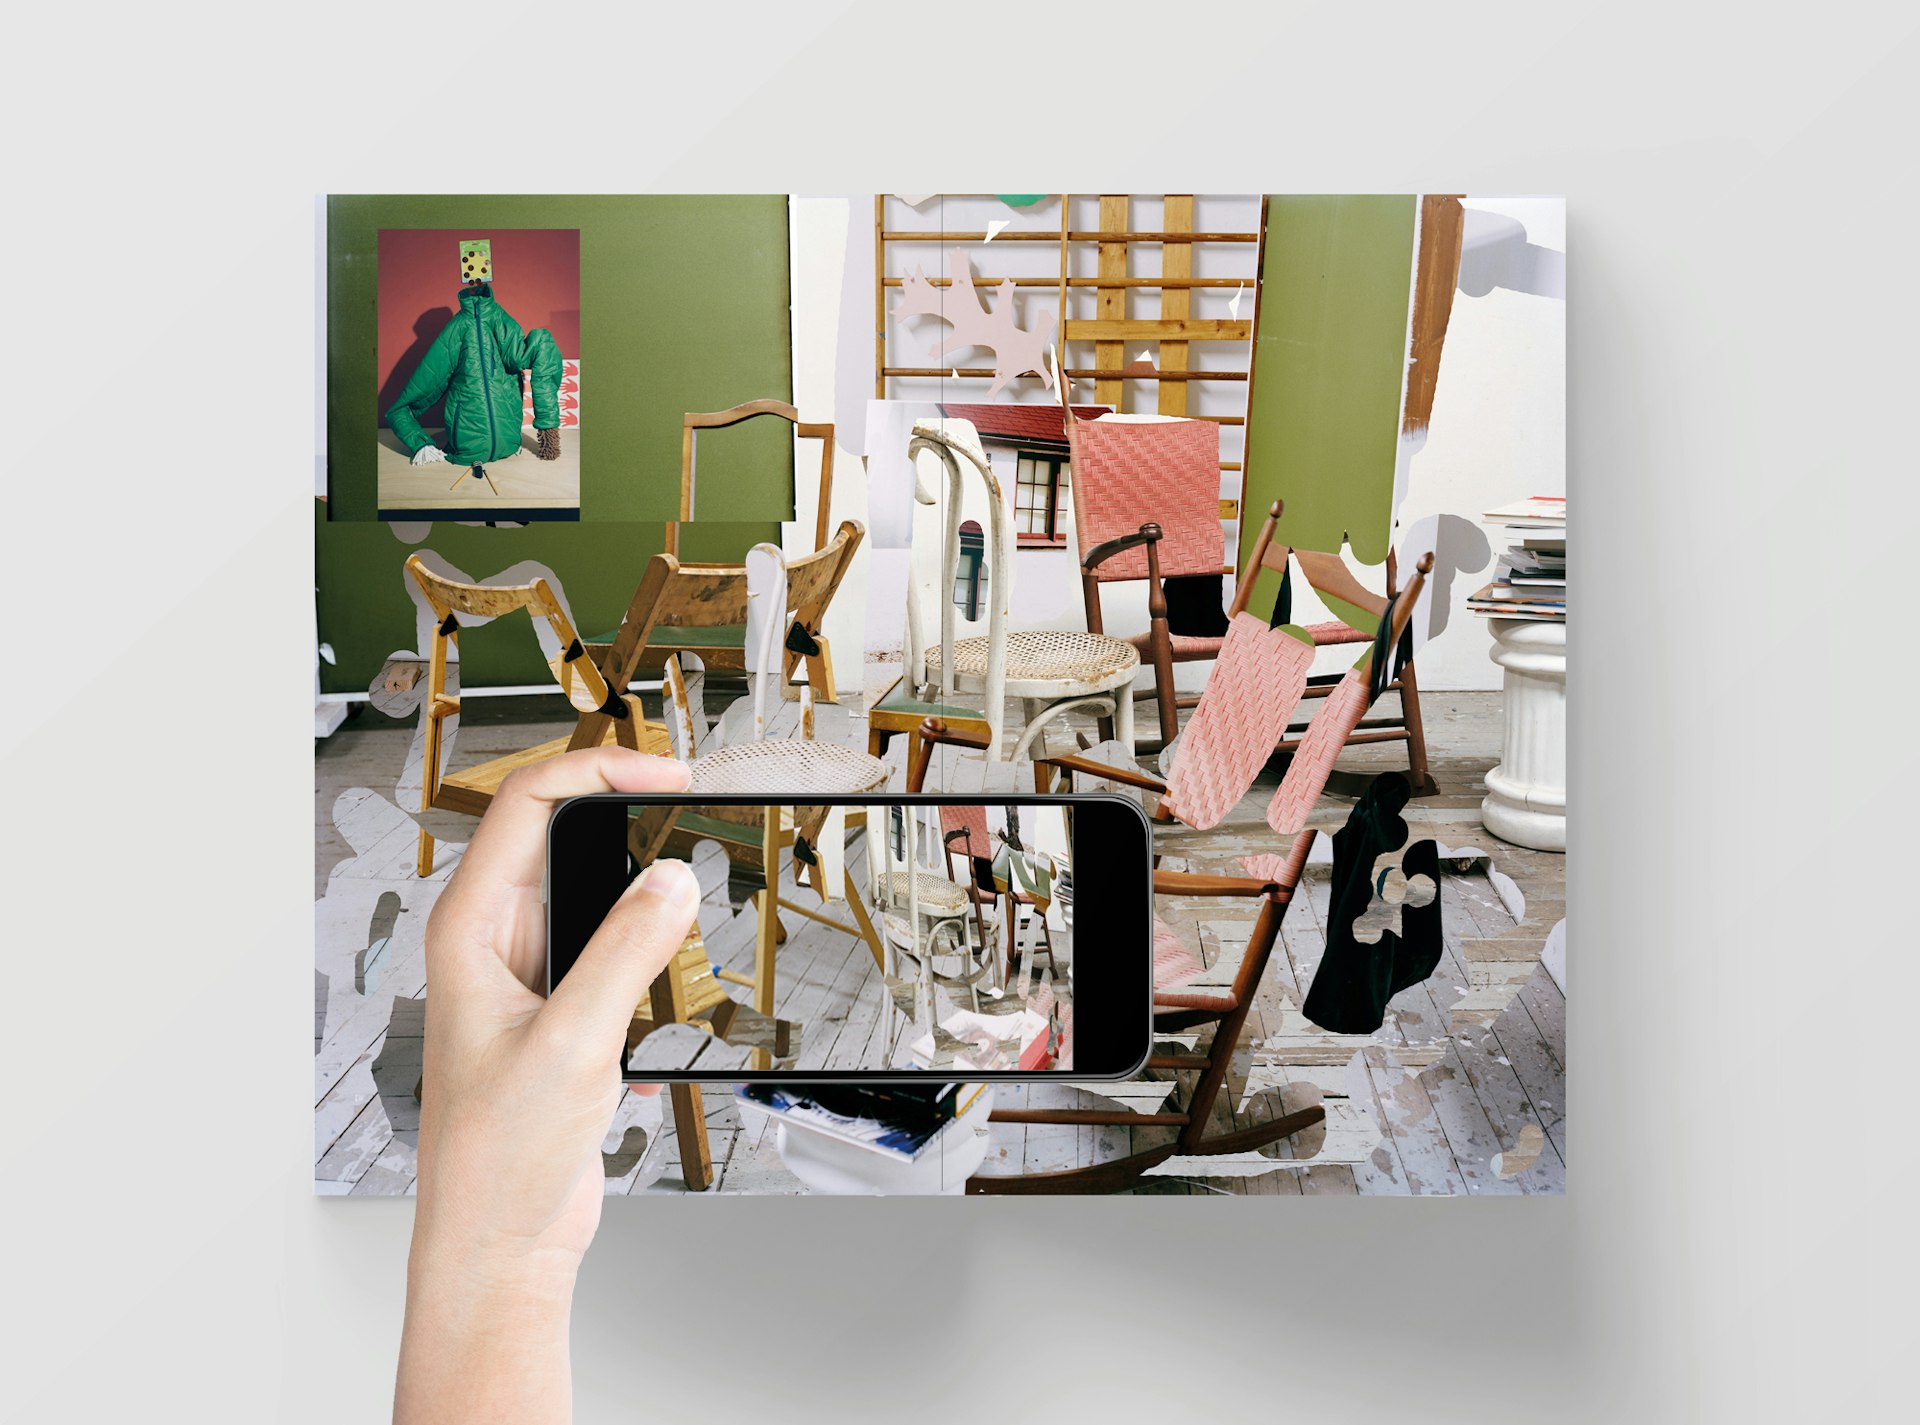 The world’s first augmented reality photobook